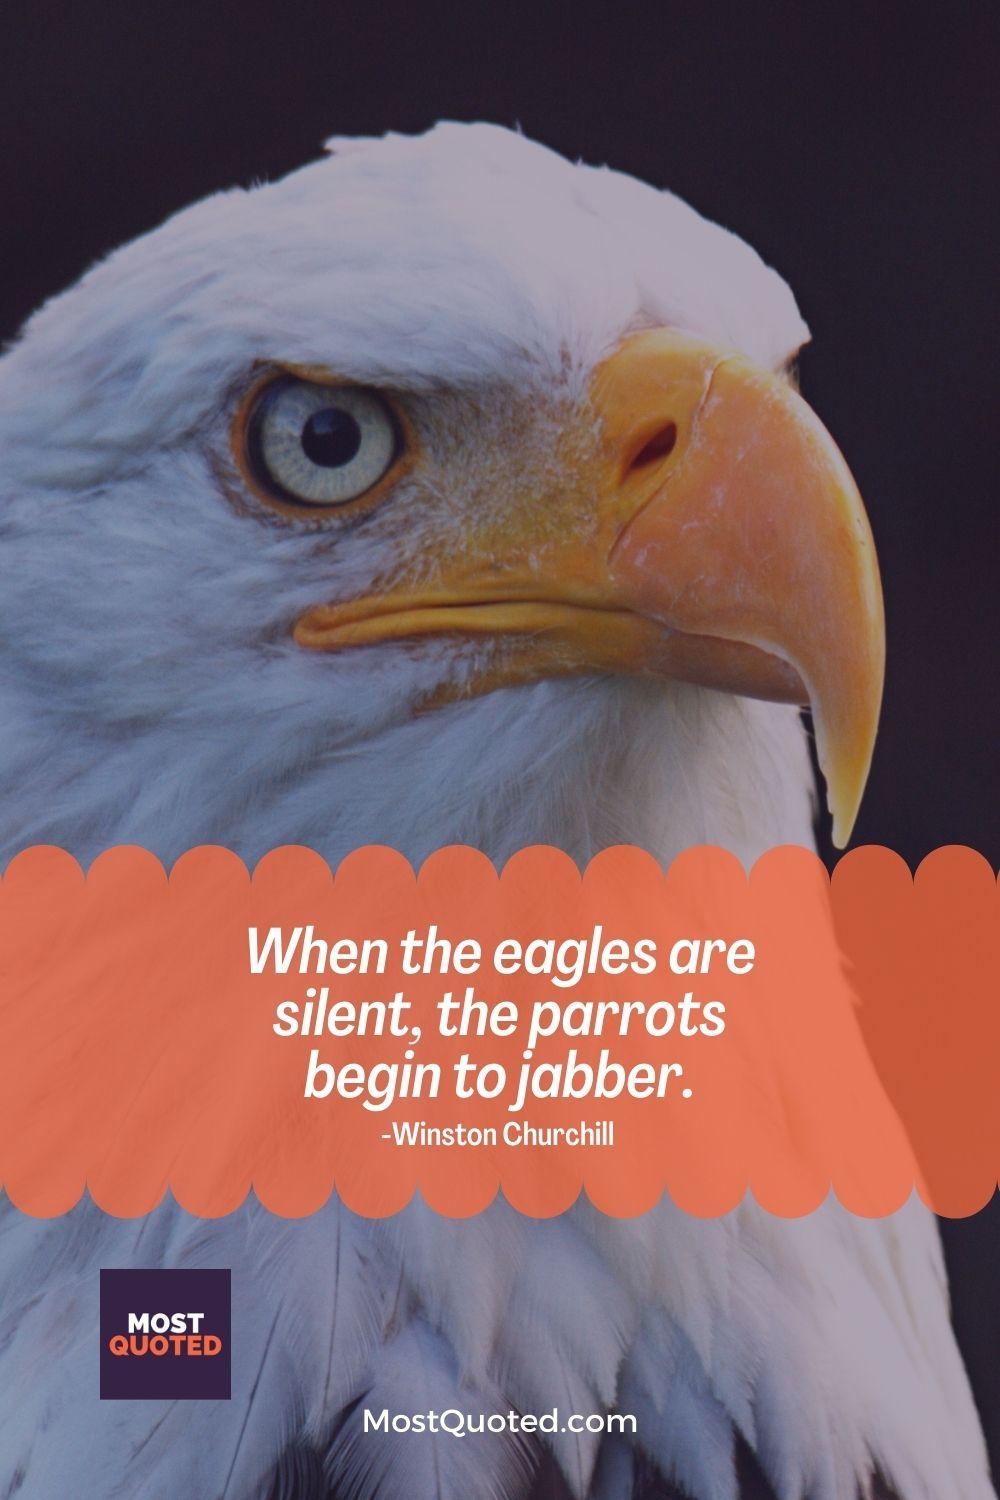 When the eagles are silent, the parrots begin to jabber. - Winston Churchill